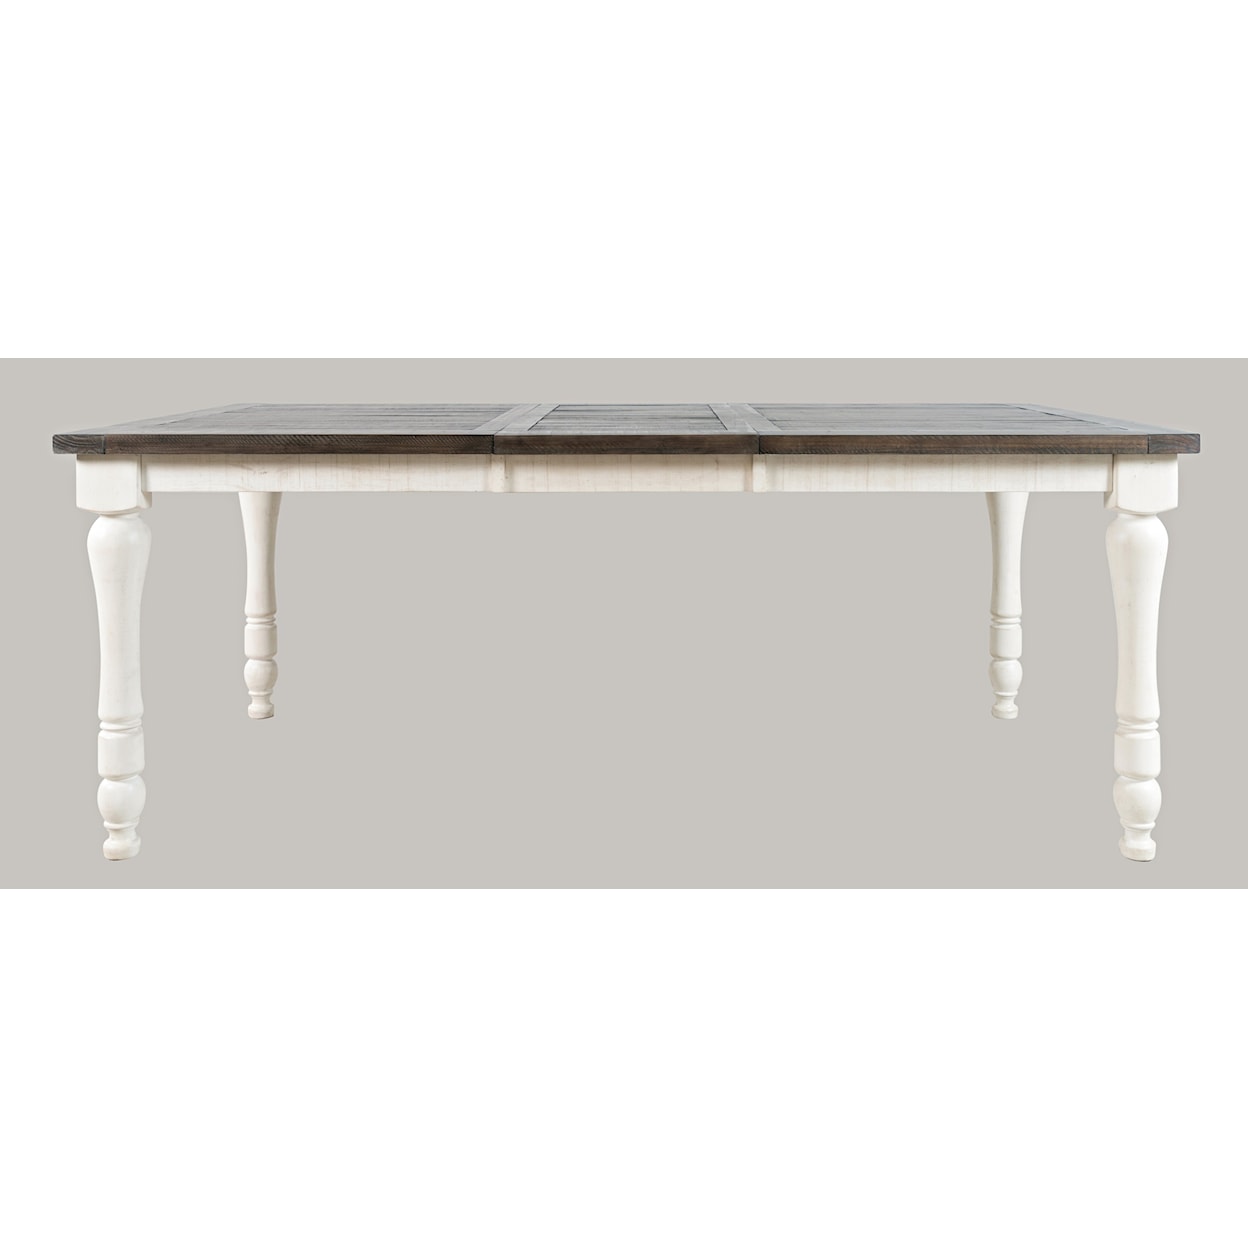 Belfort Essentials Madison County Dining Extension Table